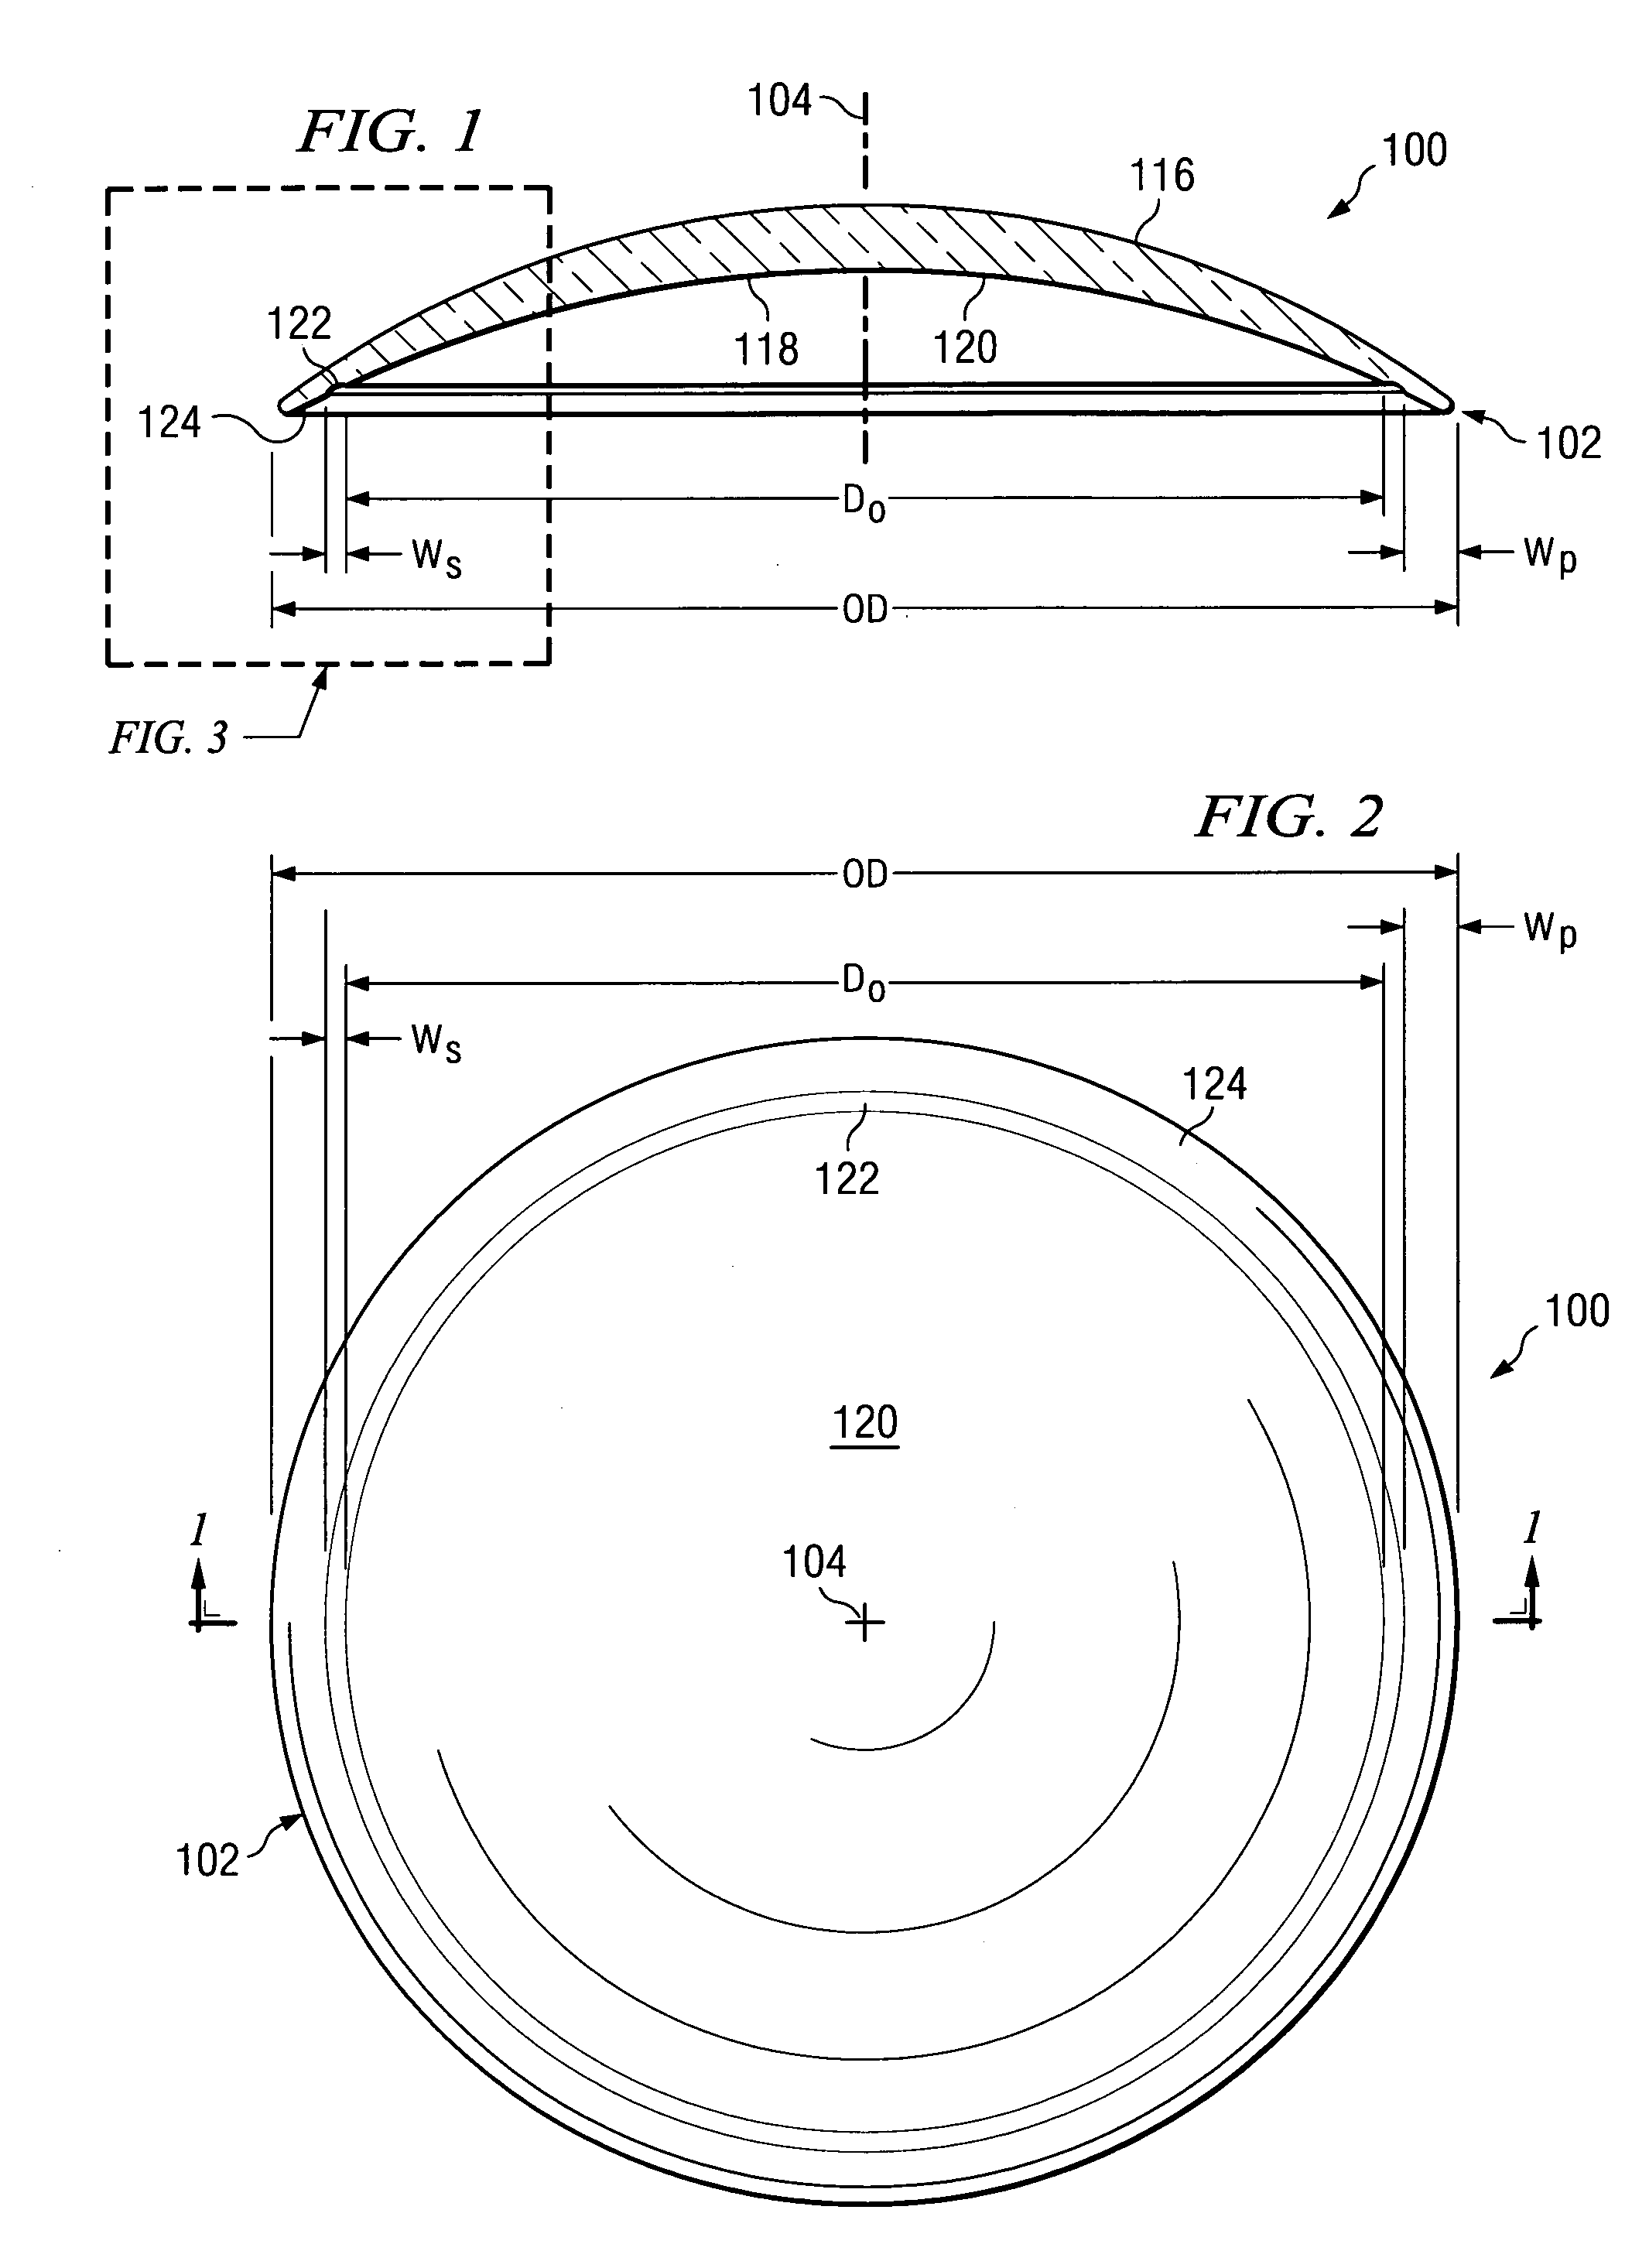 Rigid gas permeable contact lens with 3-part curvature